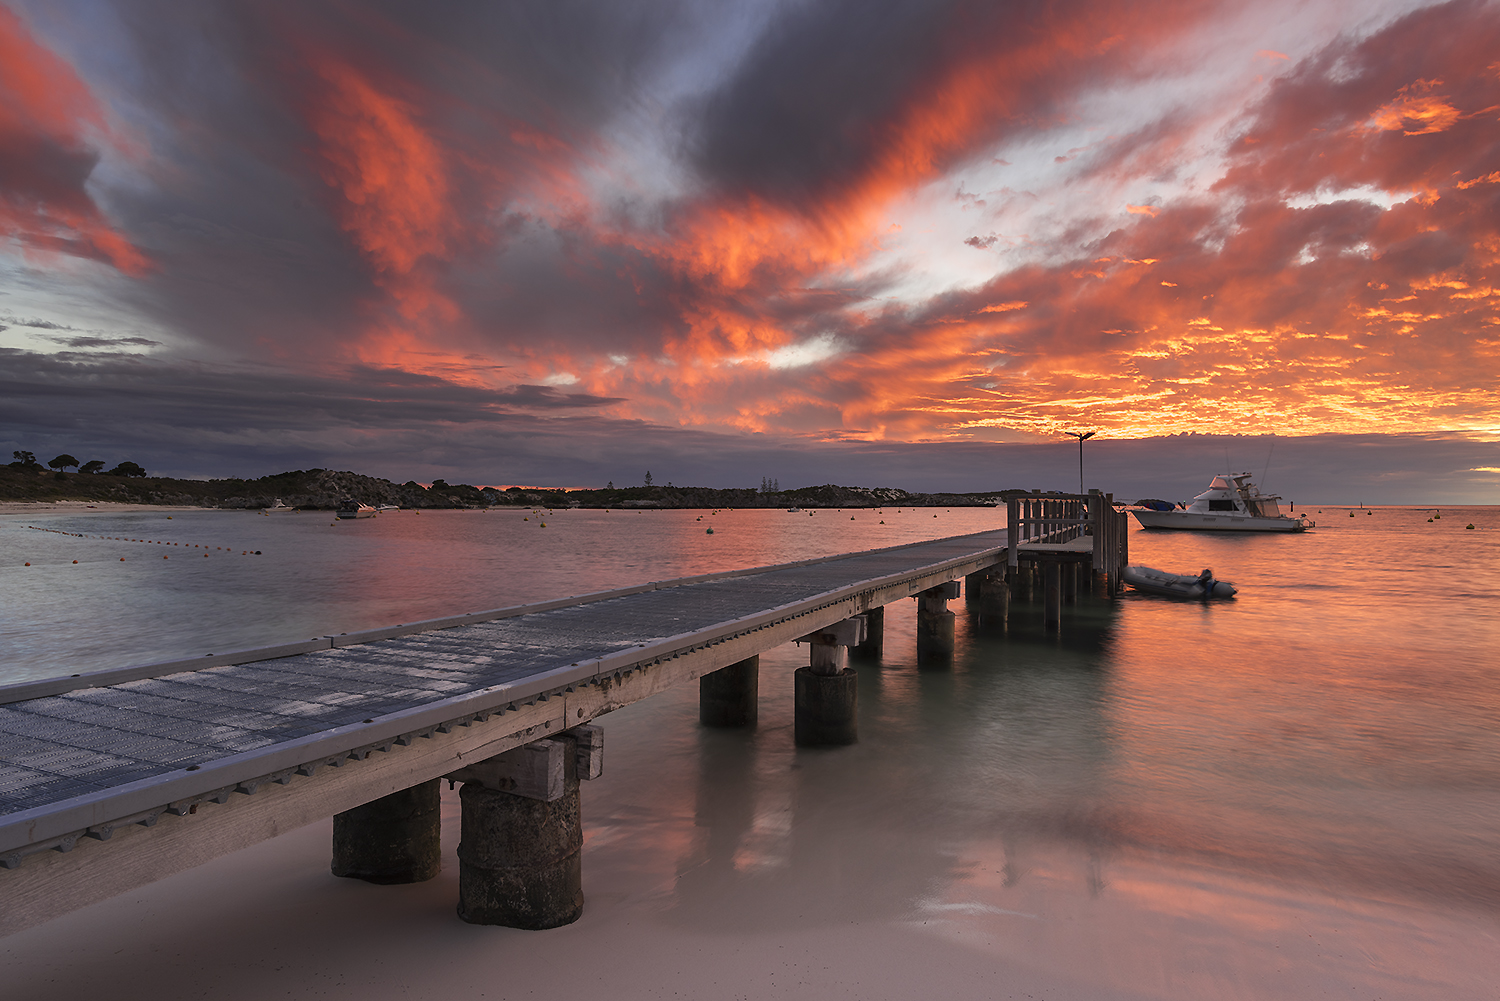 GEORDIE BAY - JETTY FLAMES from $255 AUD